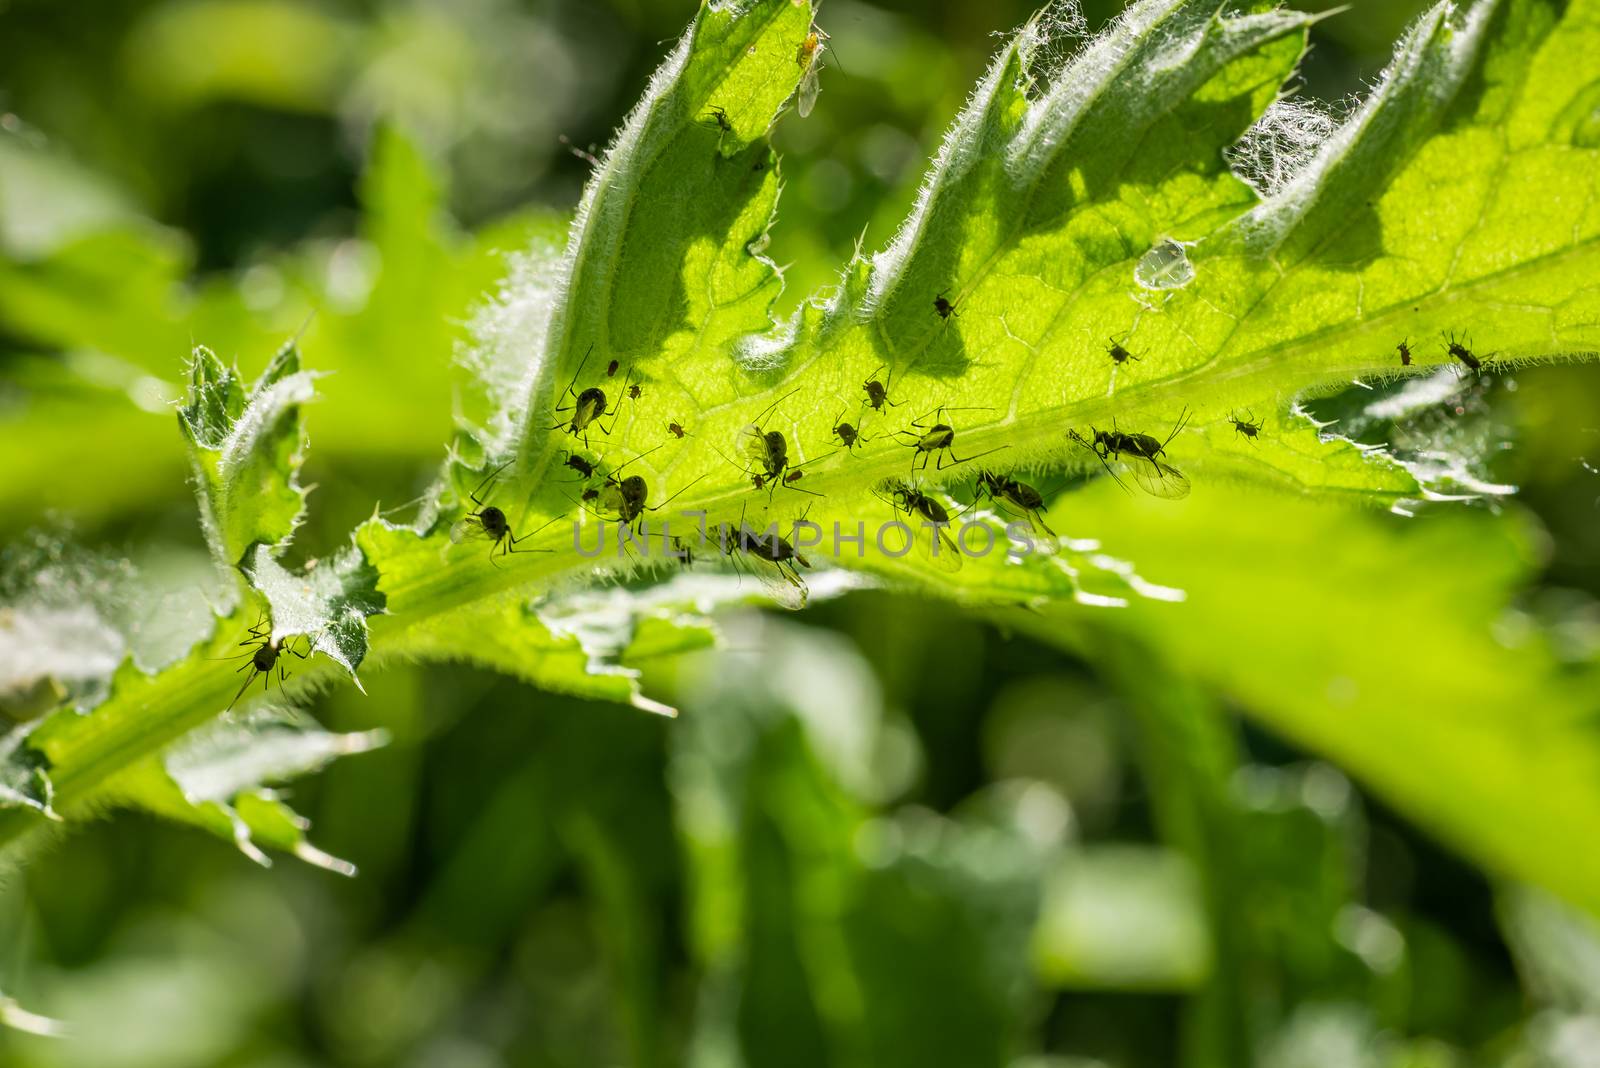 Macro shot of giant black aphid infestation on thistle plant leaves by Pendleton